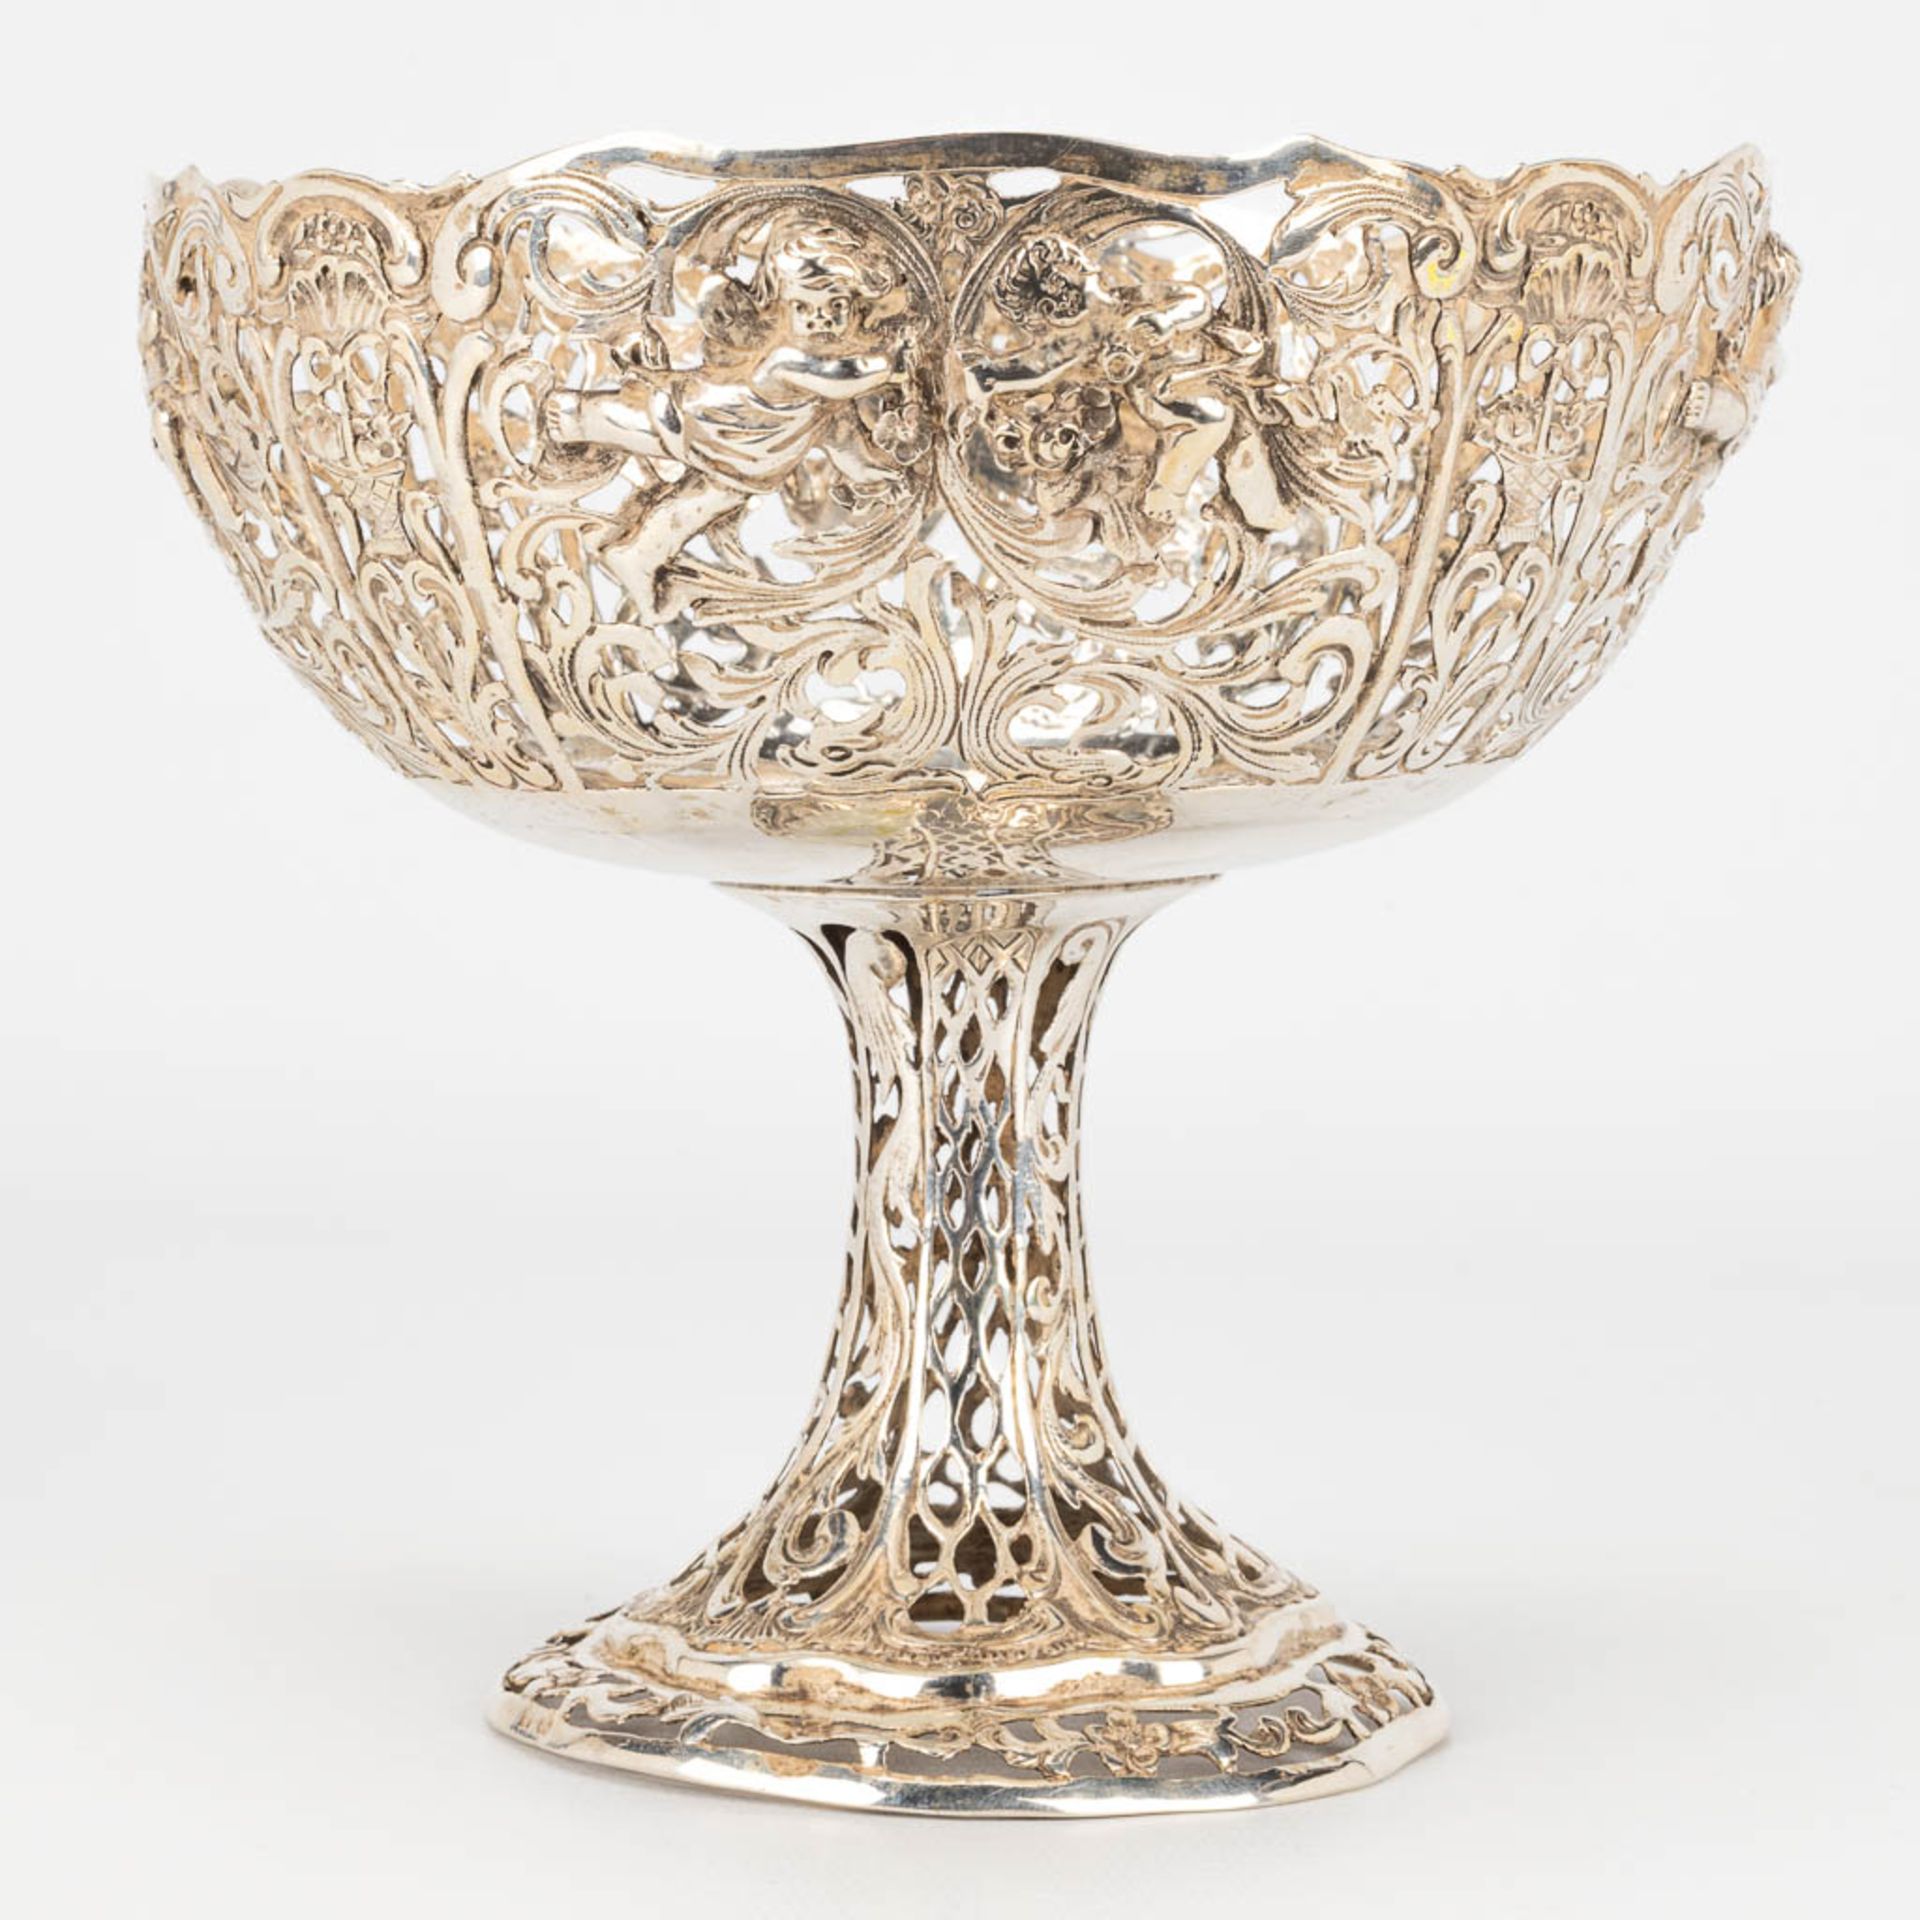 A tazza made of silver and decorated with putti. 248g